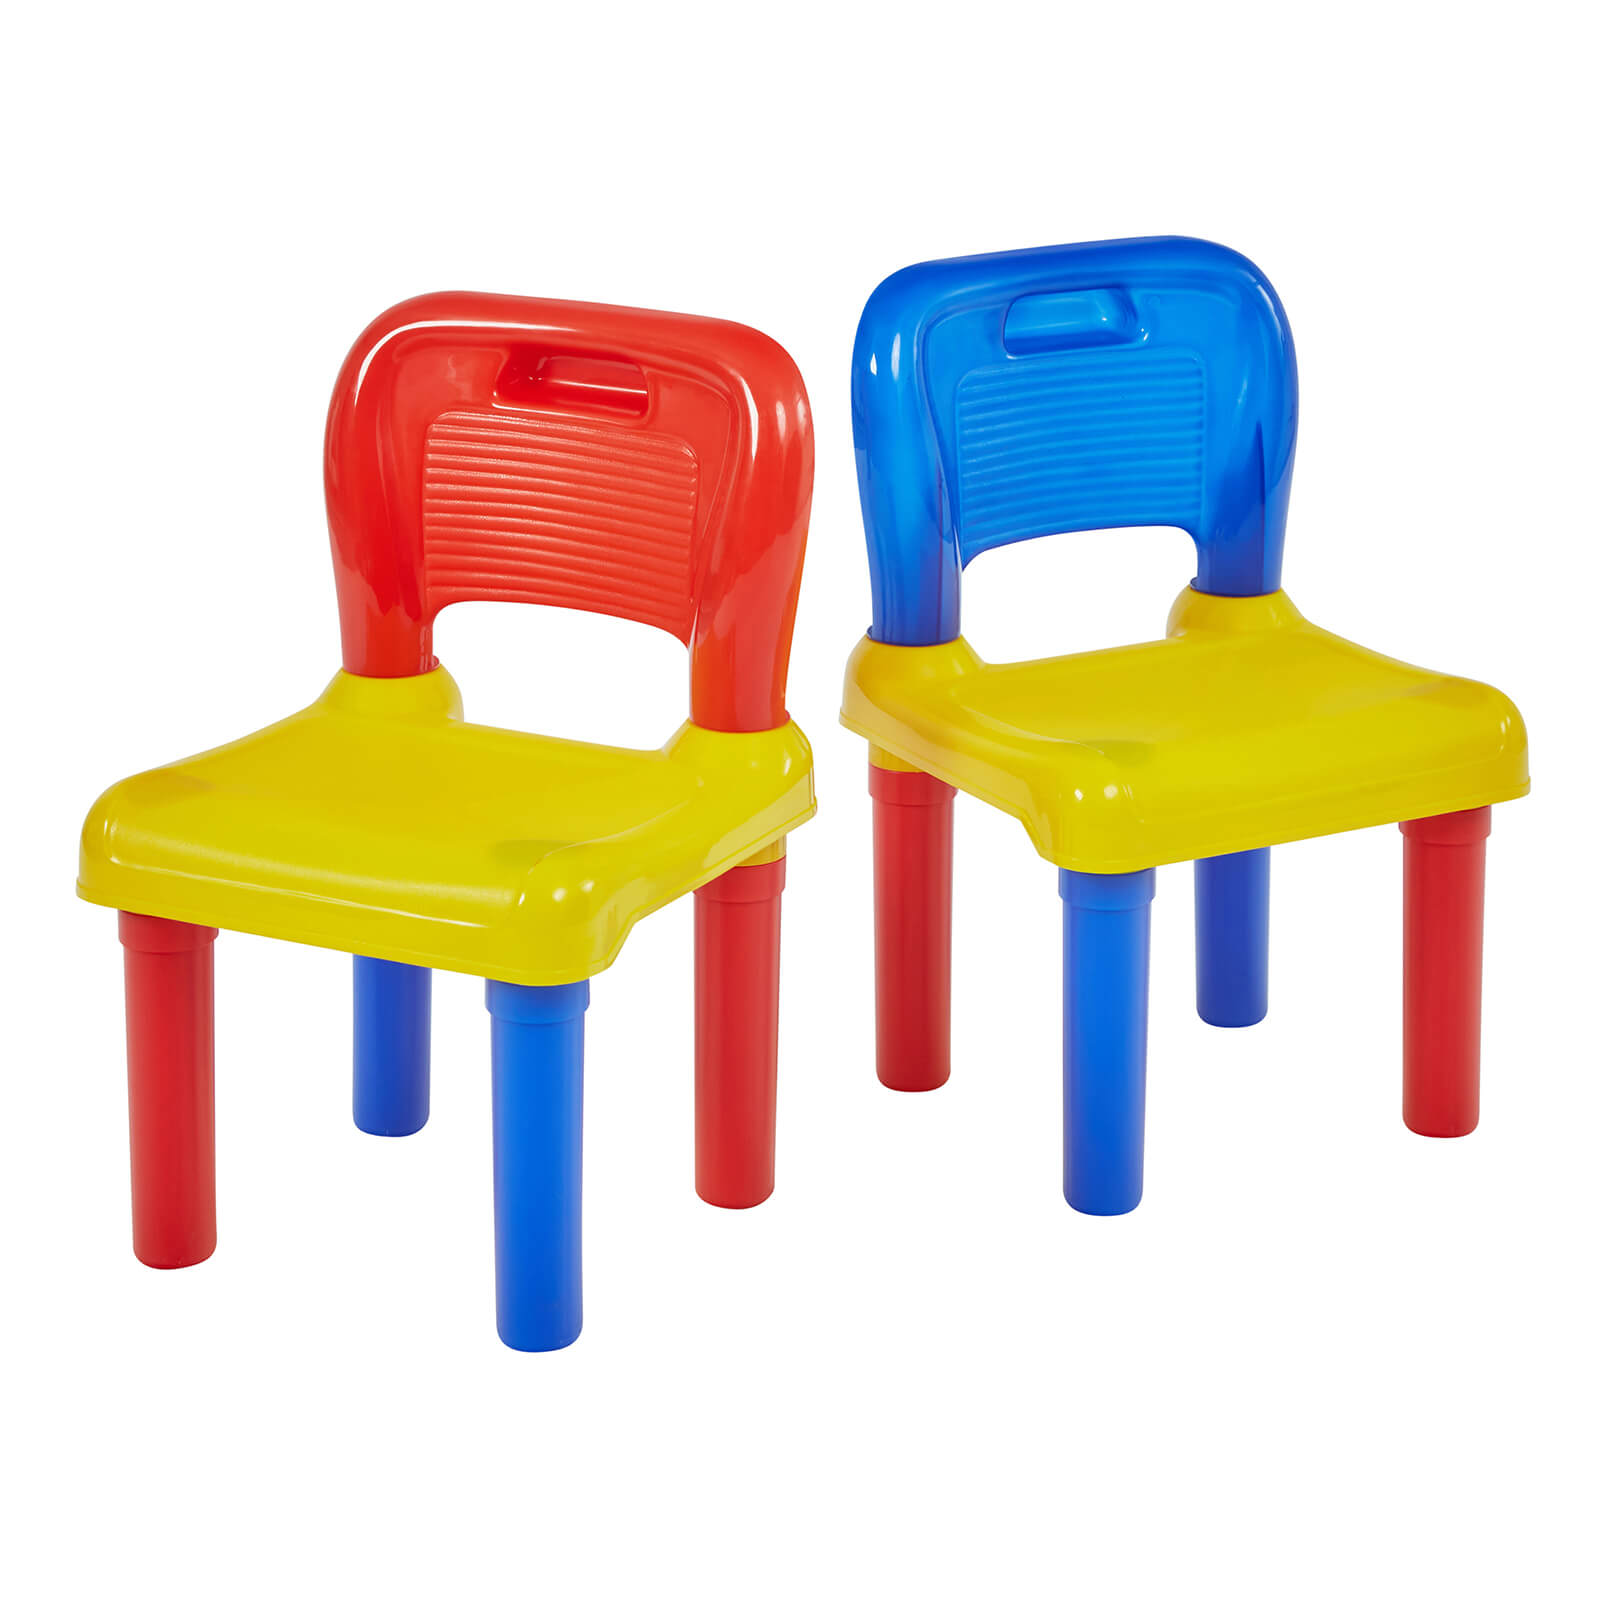 Two Mulitcoloured Plastic Chairs